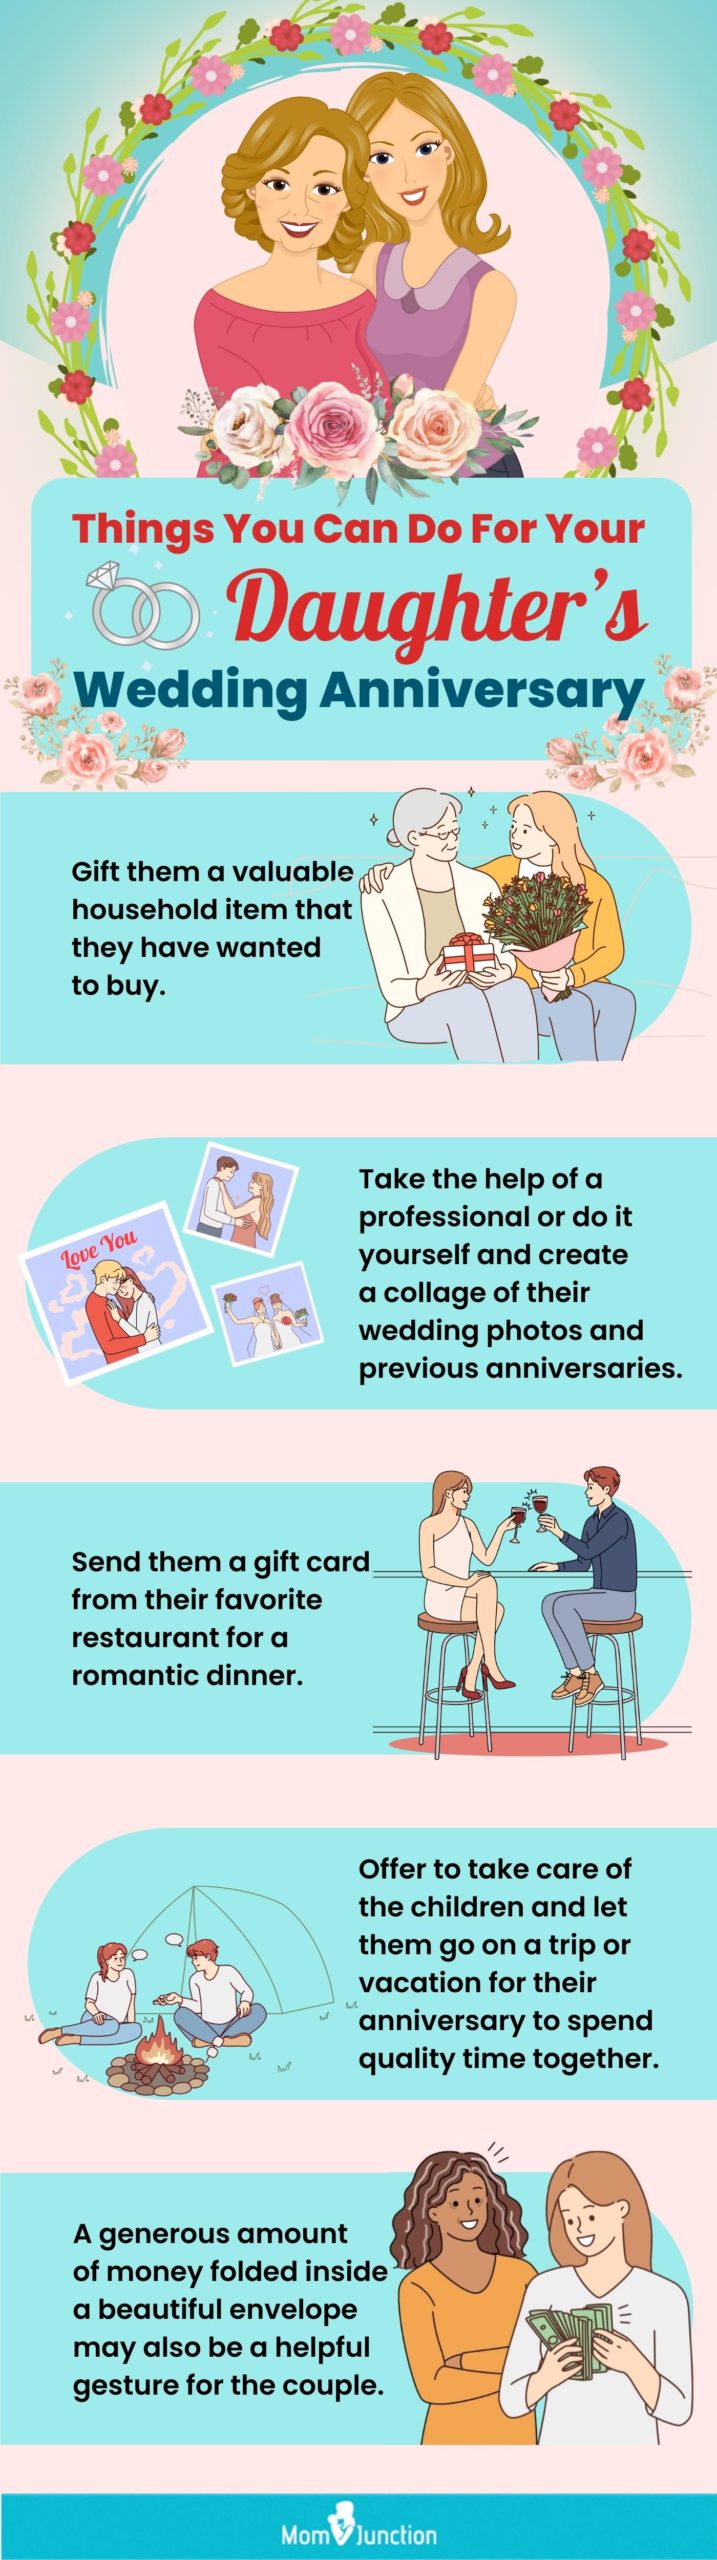 things you can do For your daughters wedding anniversary (infographic)